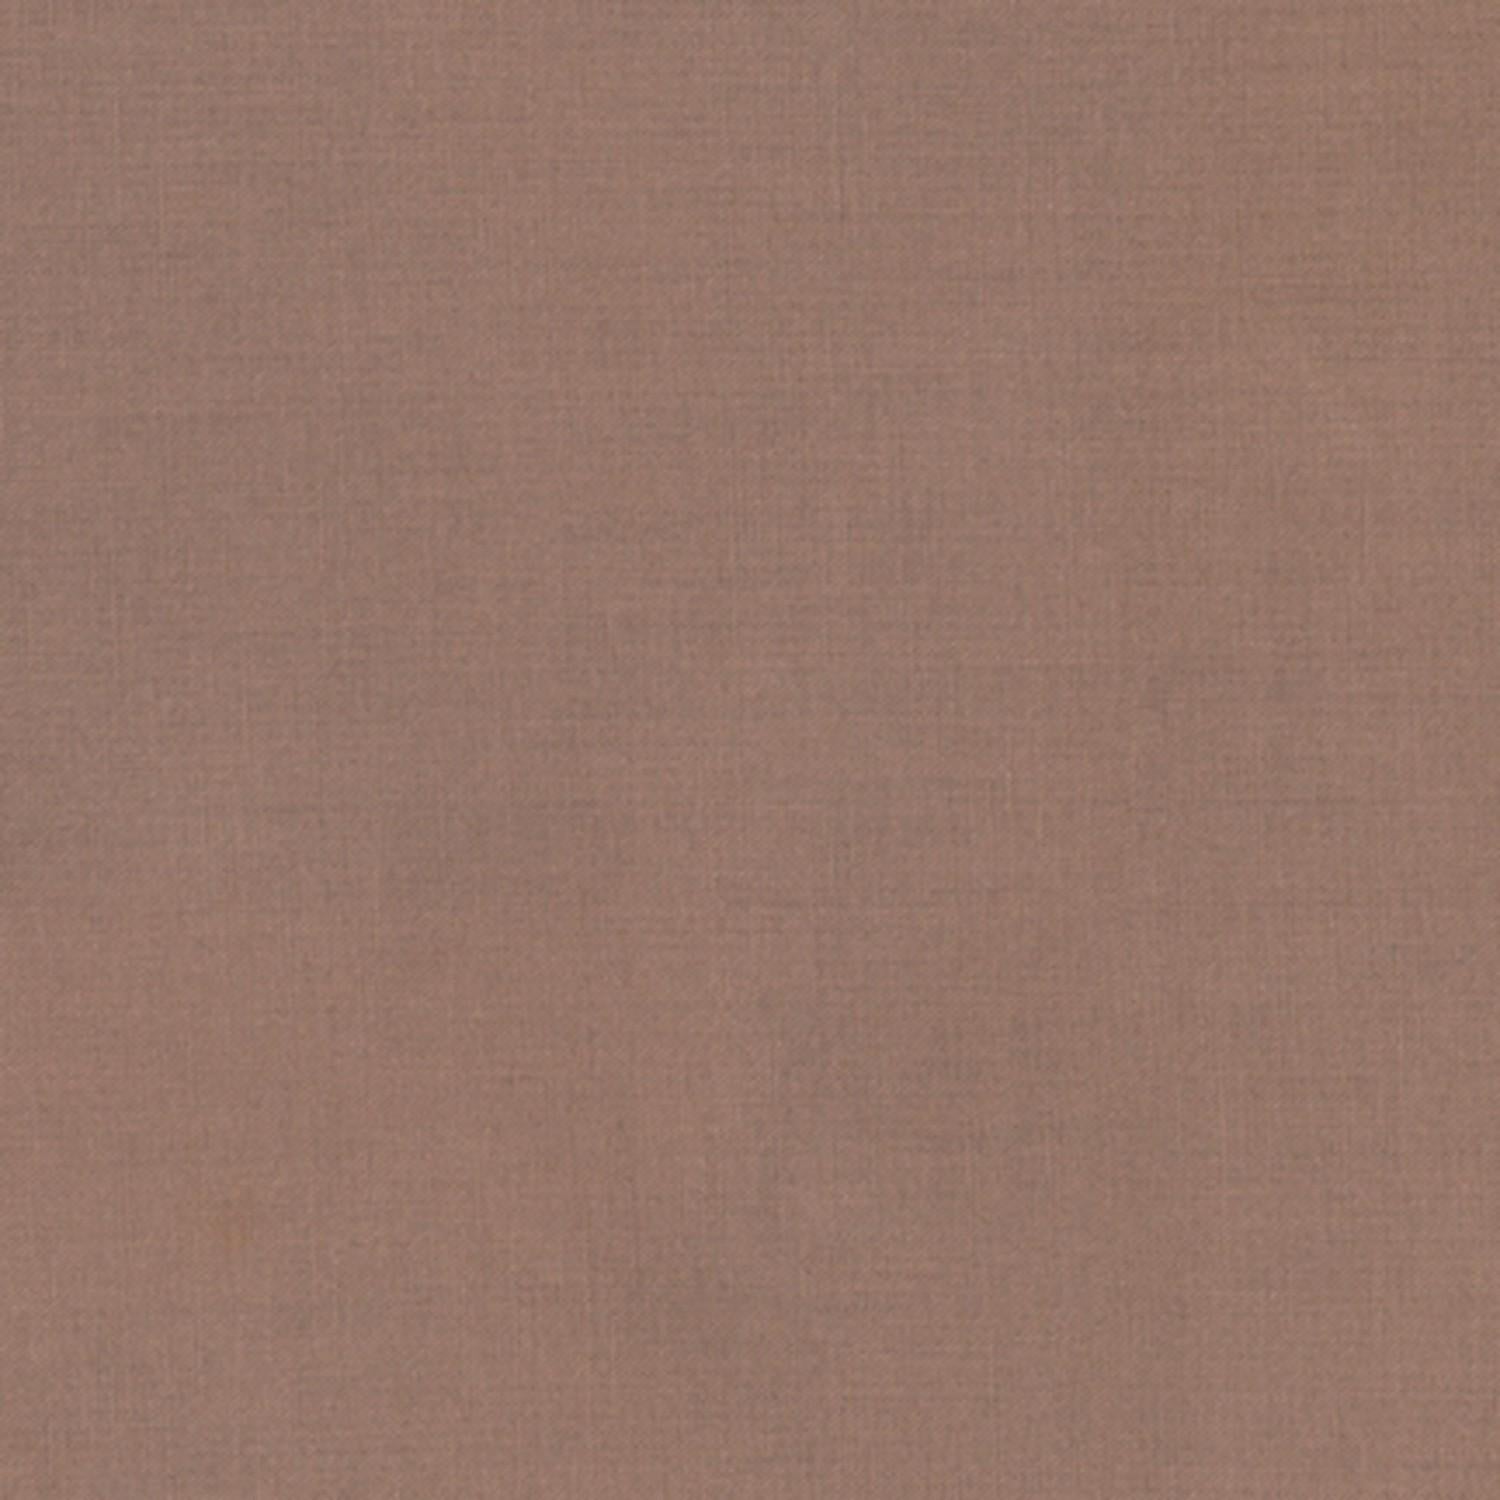 Taupe Solid K001-1371 # KONA-TAUPE